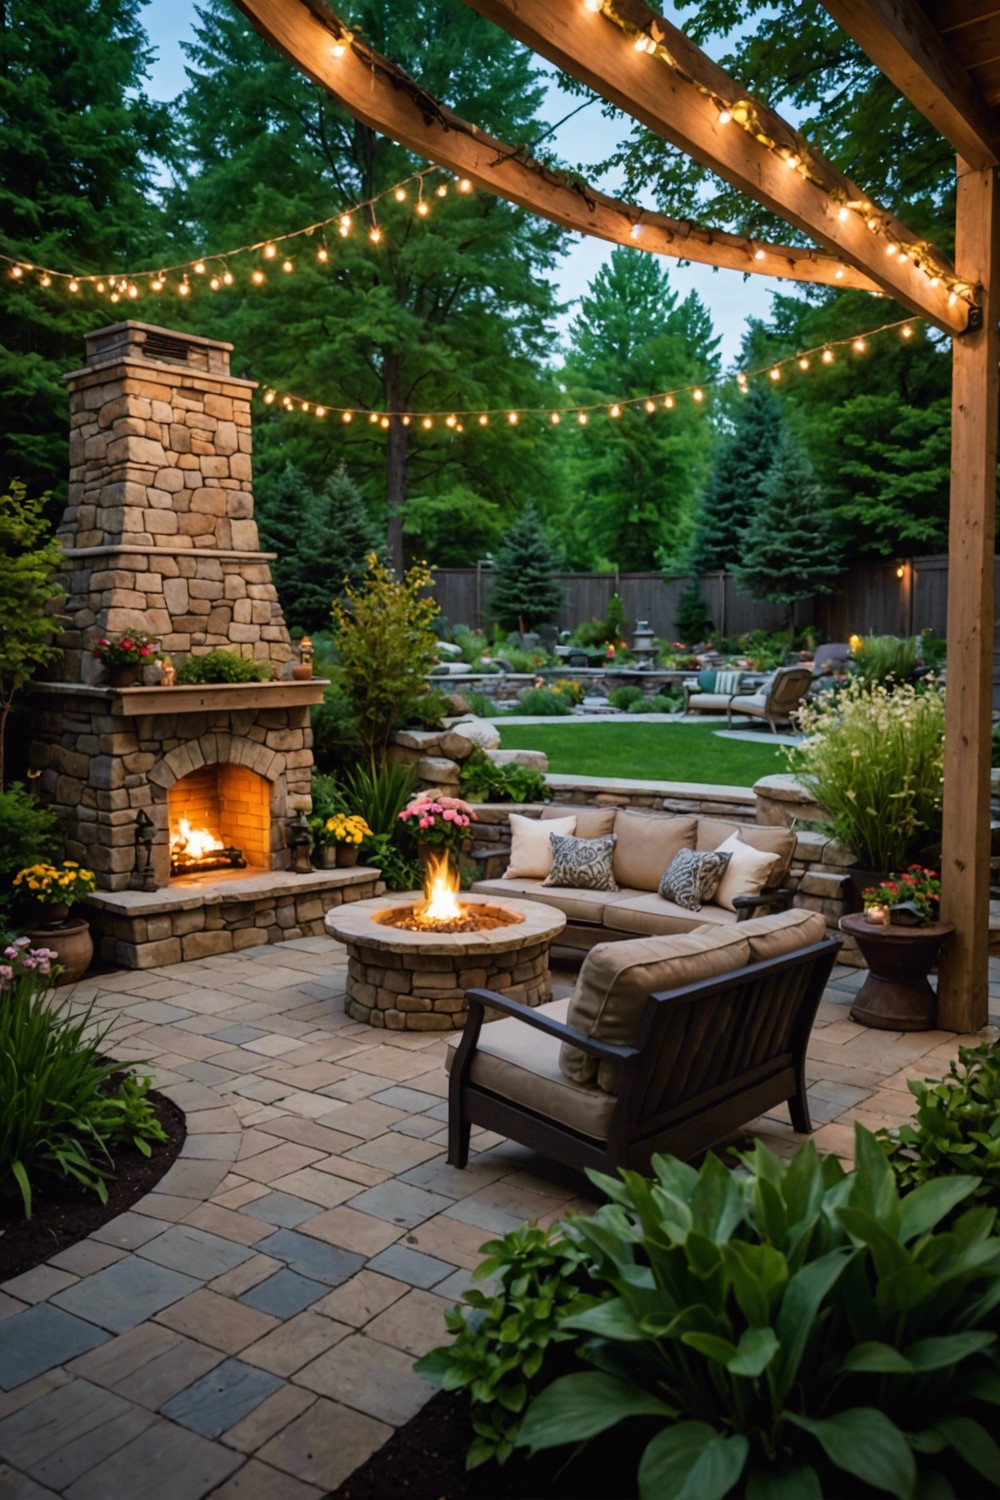 Backyard Oasis with Outdoor Fireplace and Water Feature